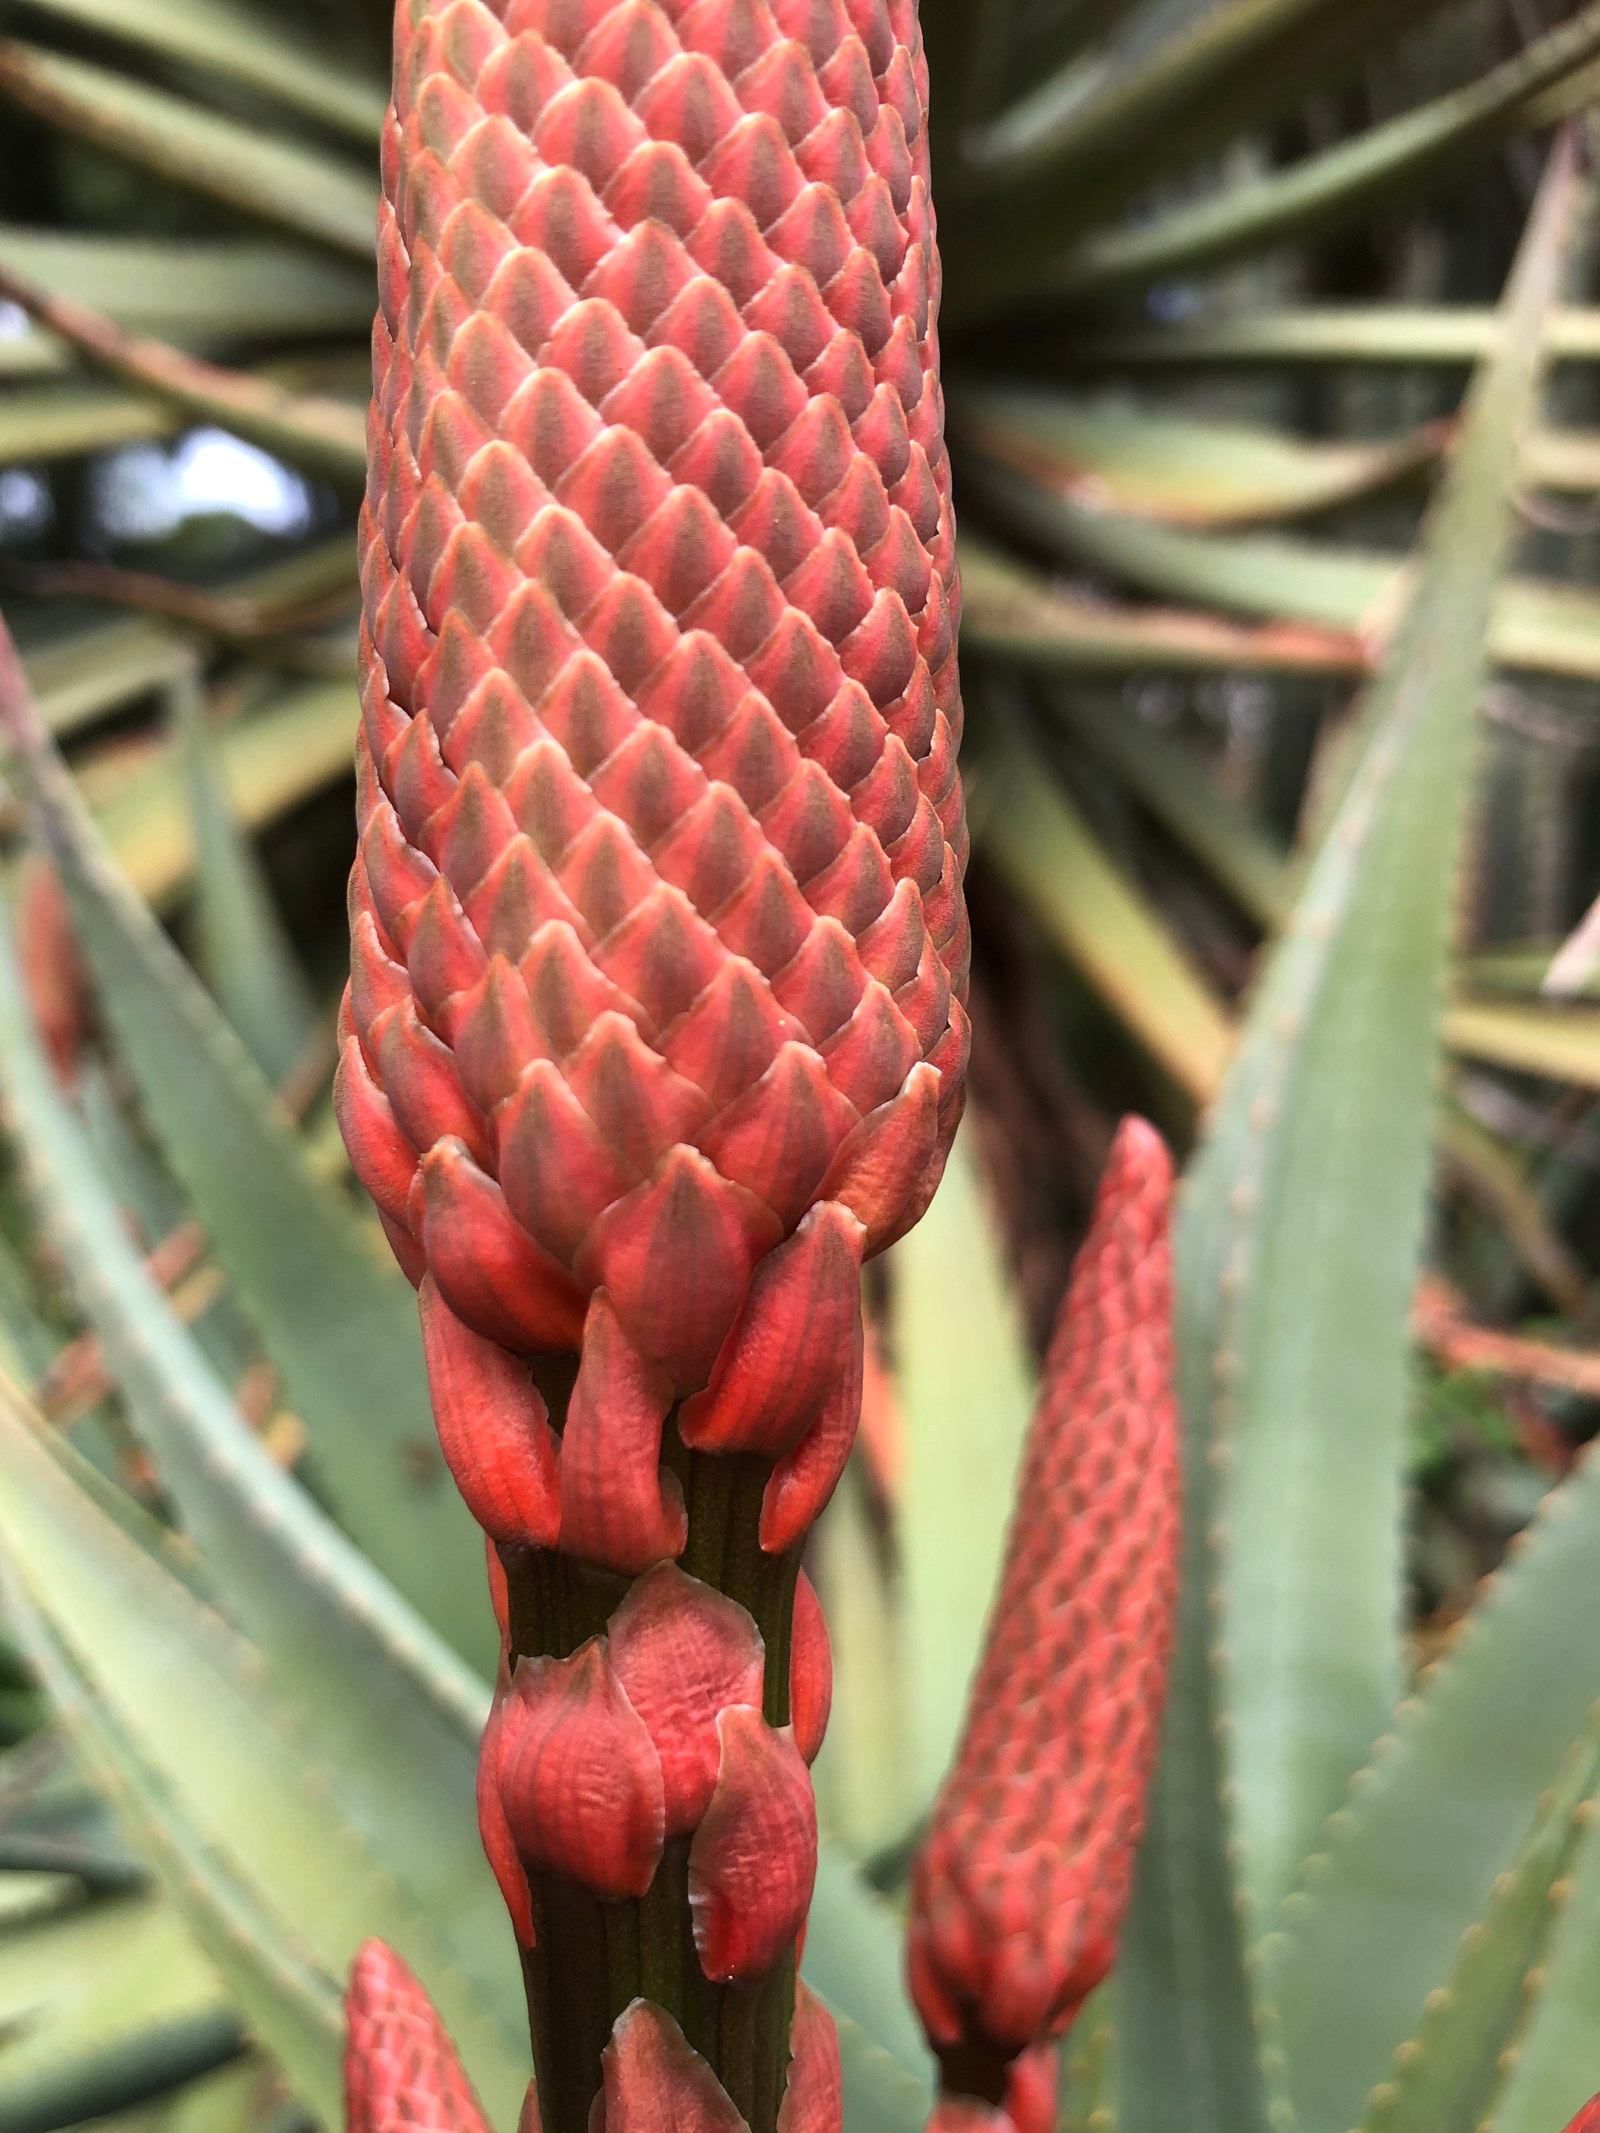 The dark red flower spike or inflorescence is under formed in this image of aloe arborescens.